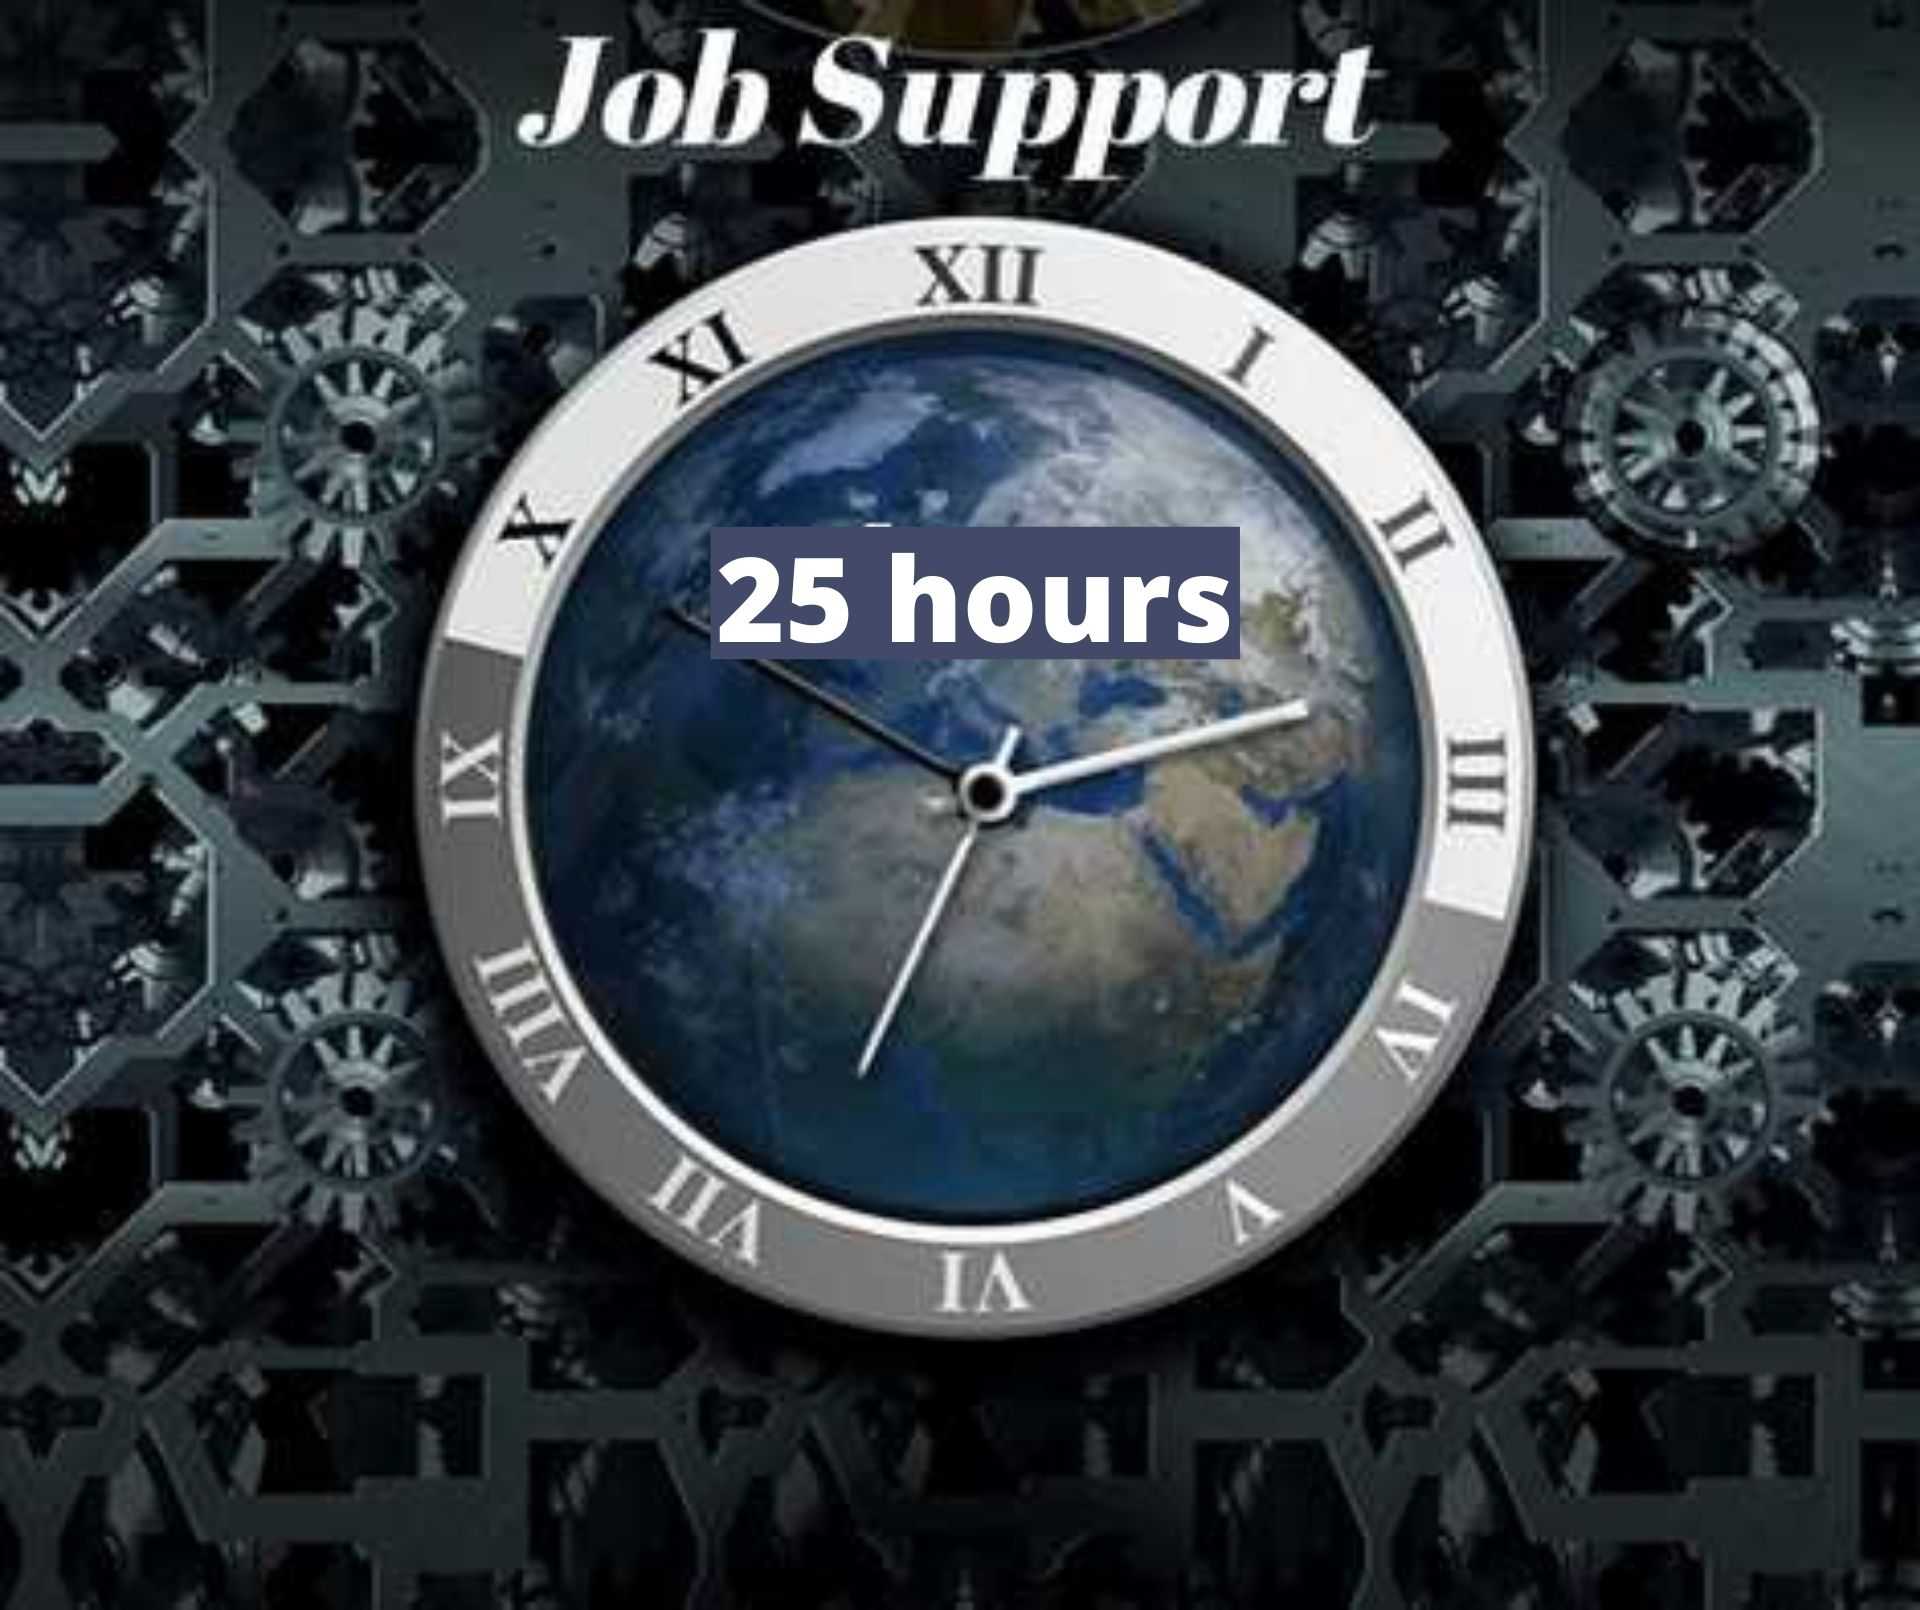 SAP Job Support - 25 hours course and certification